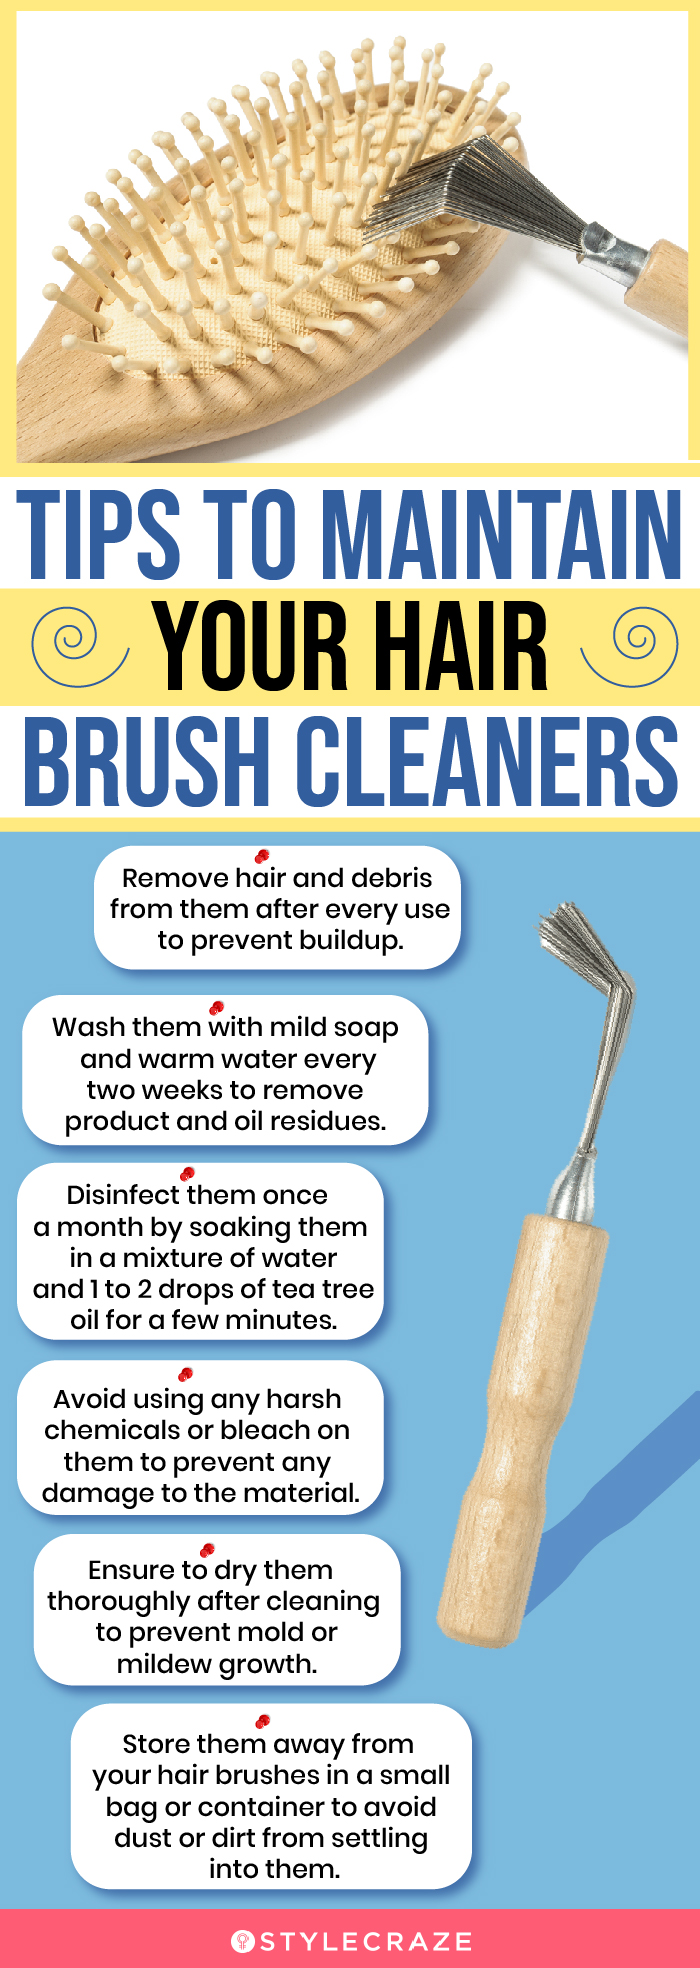 Tips To Maintain Your Hair Brush Cleaners (infographic)